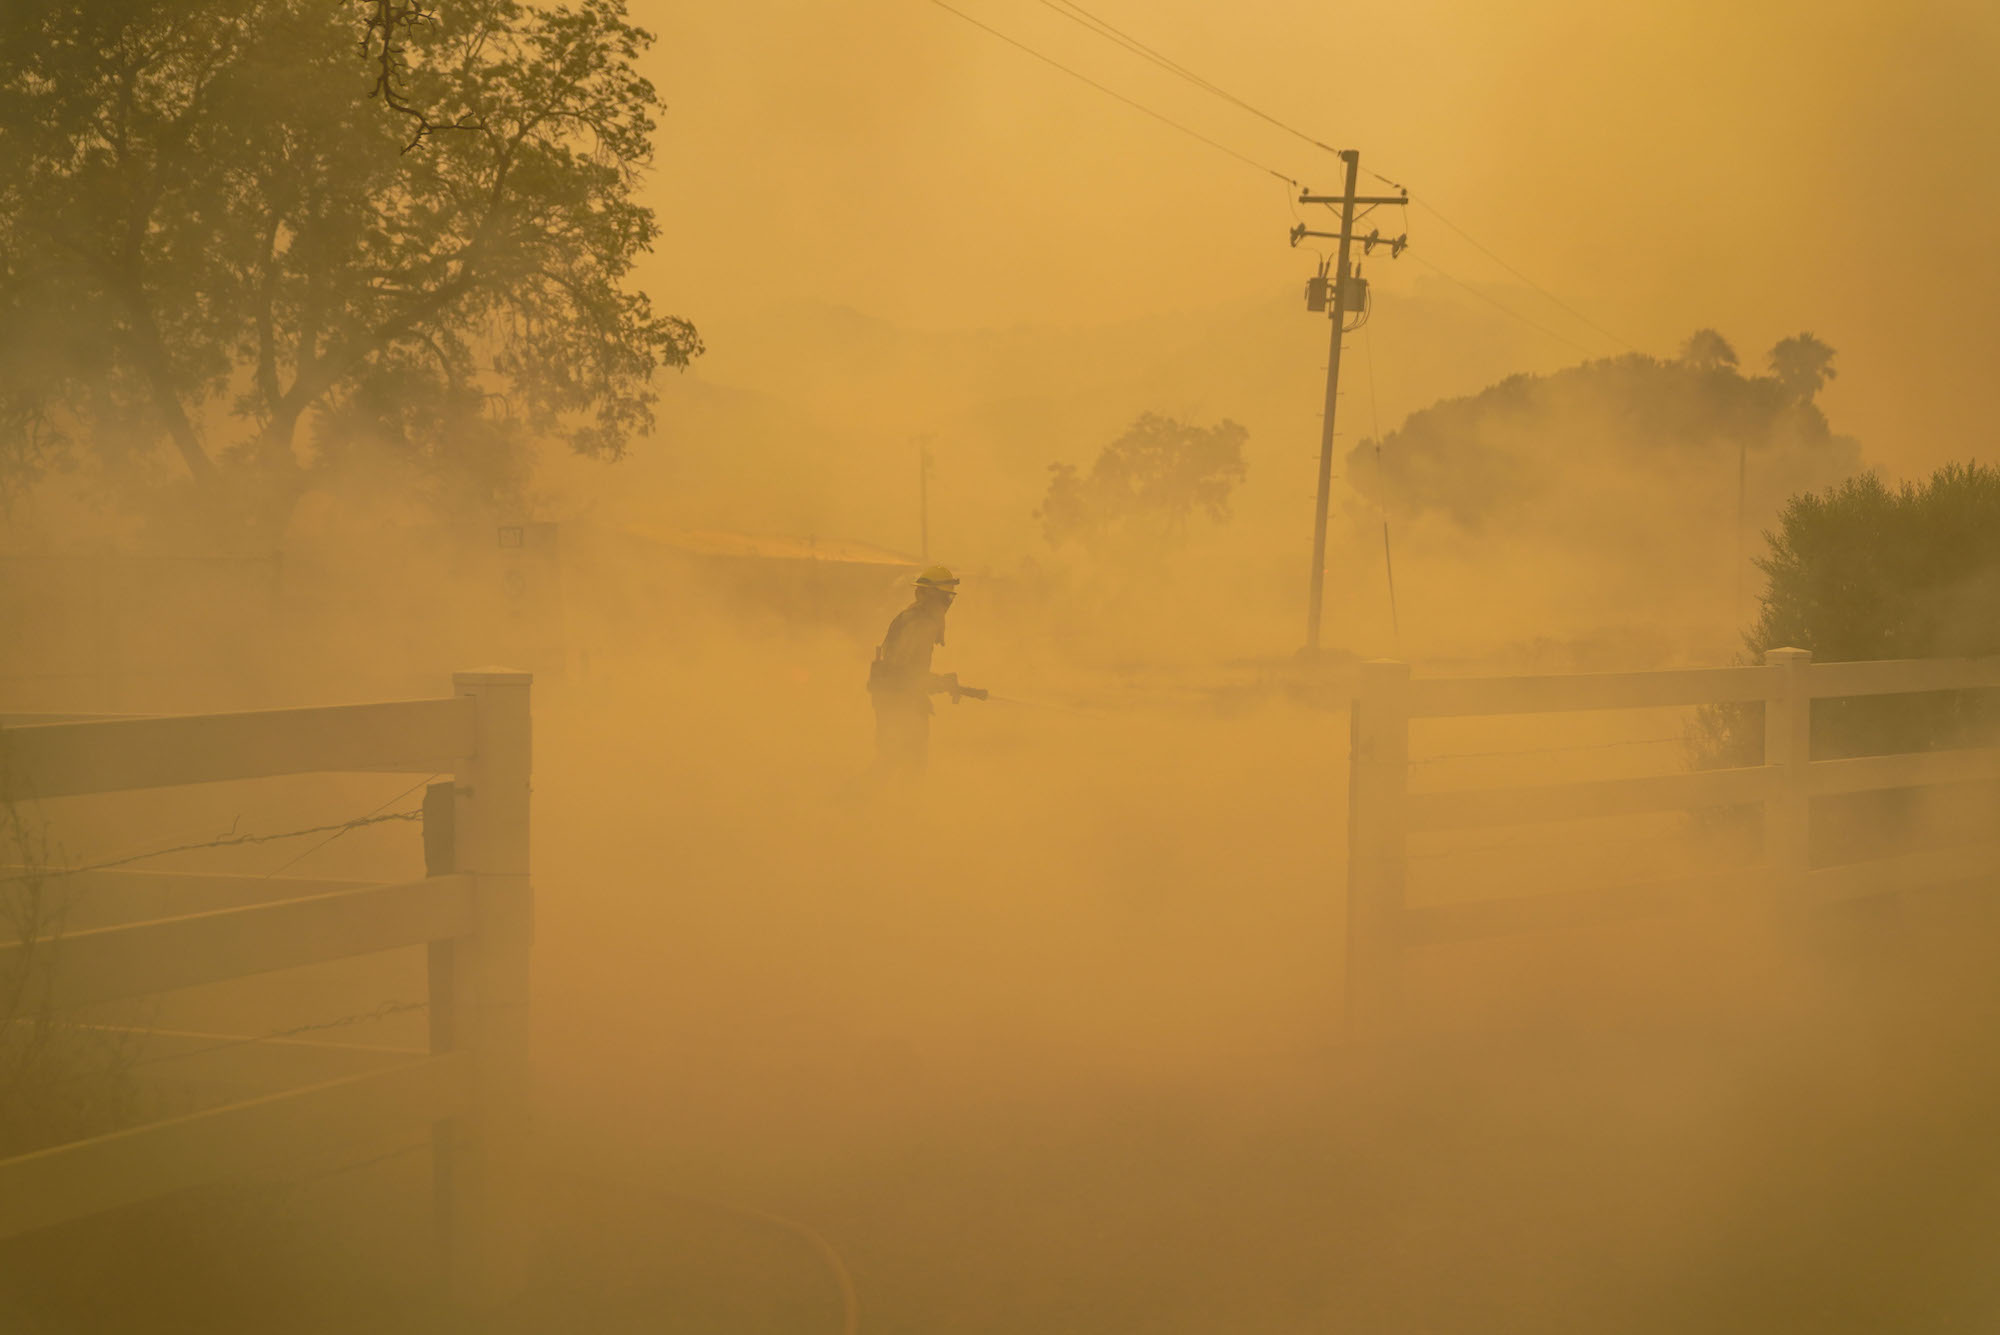 an orange smoky scene with trees, electrical wires and a lone firefighter